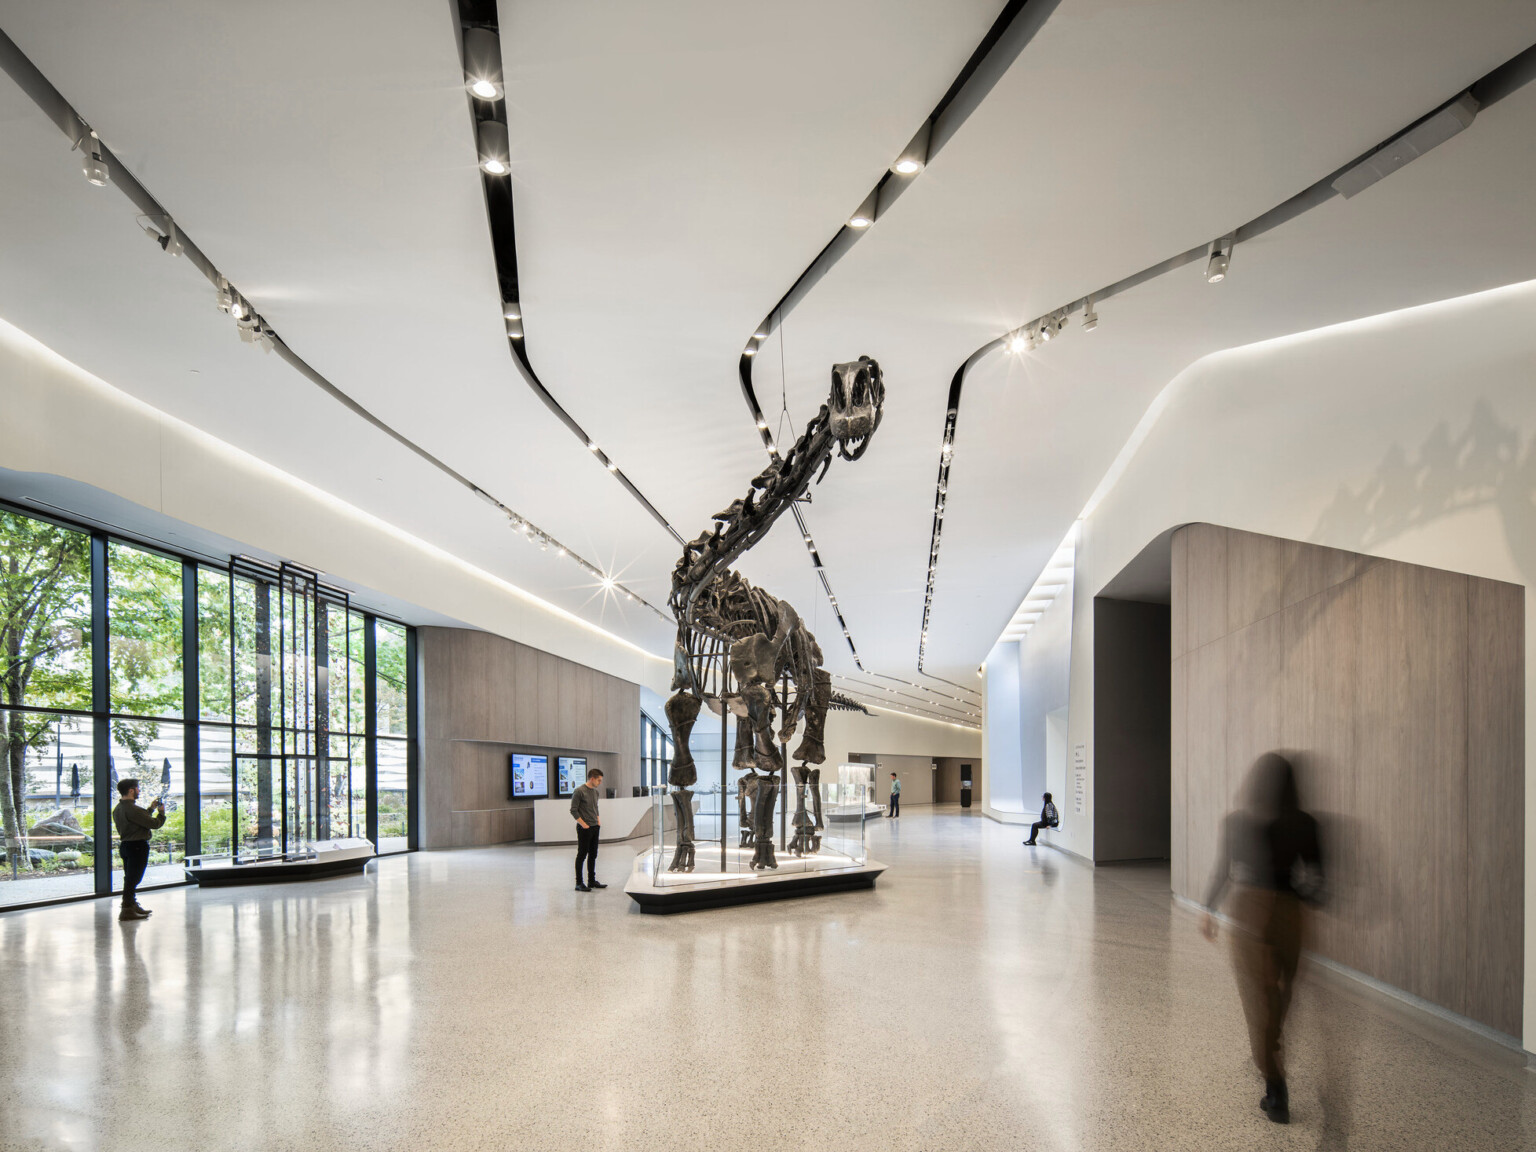 A dinosaur skeleton in an exhibition hall with people walking and viewing the exhibit in the large space with white walls, light tile flooring